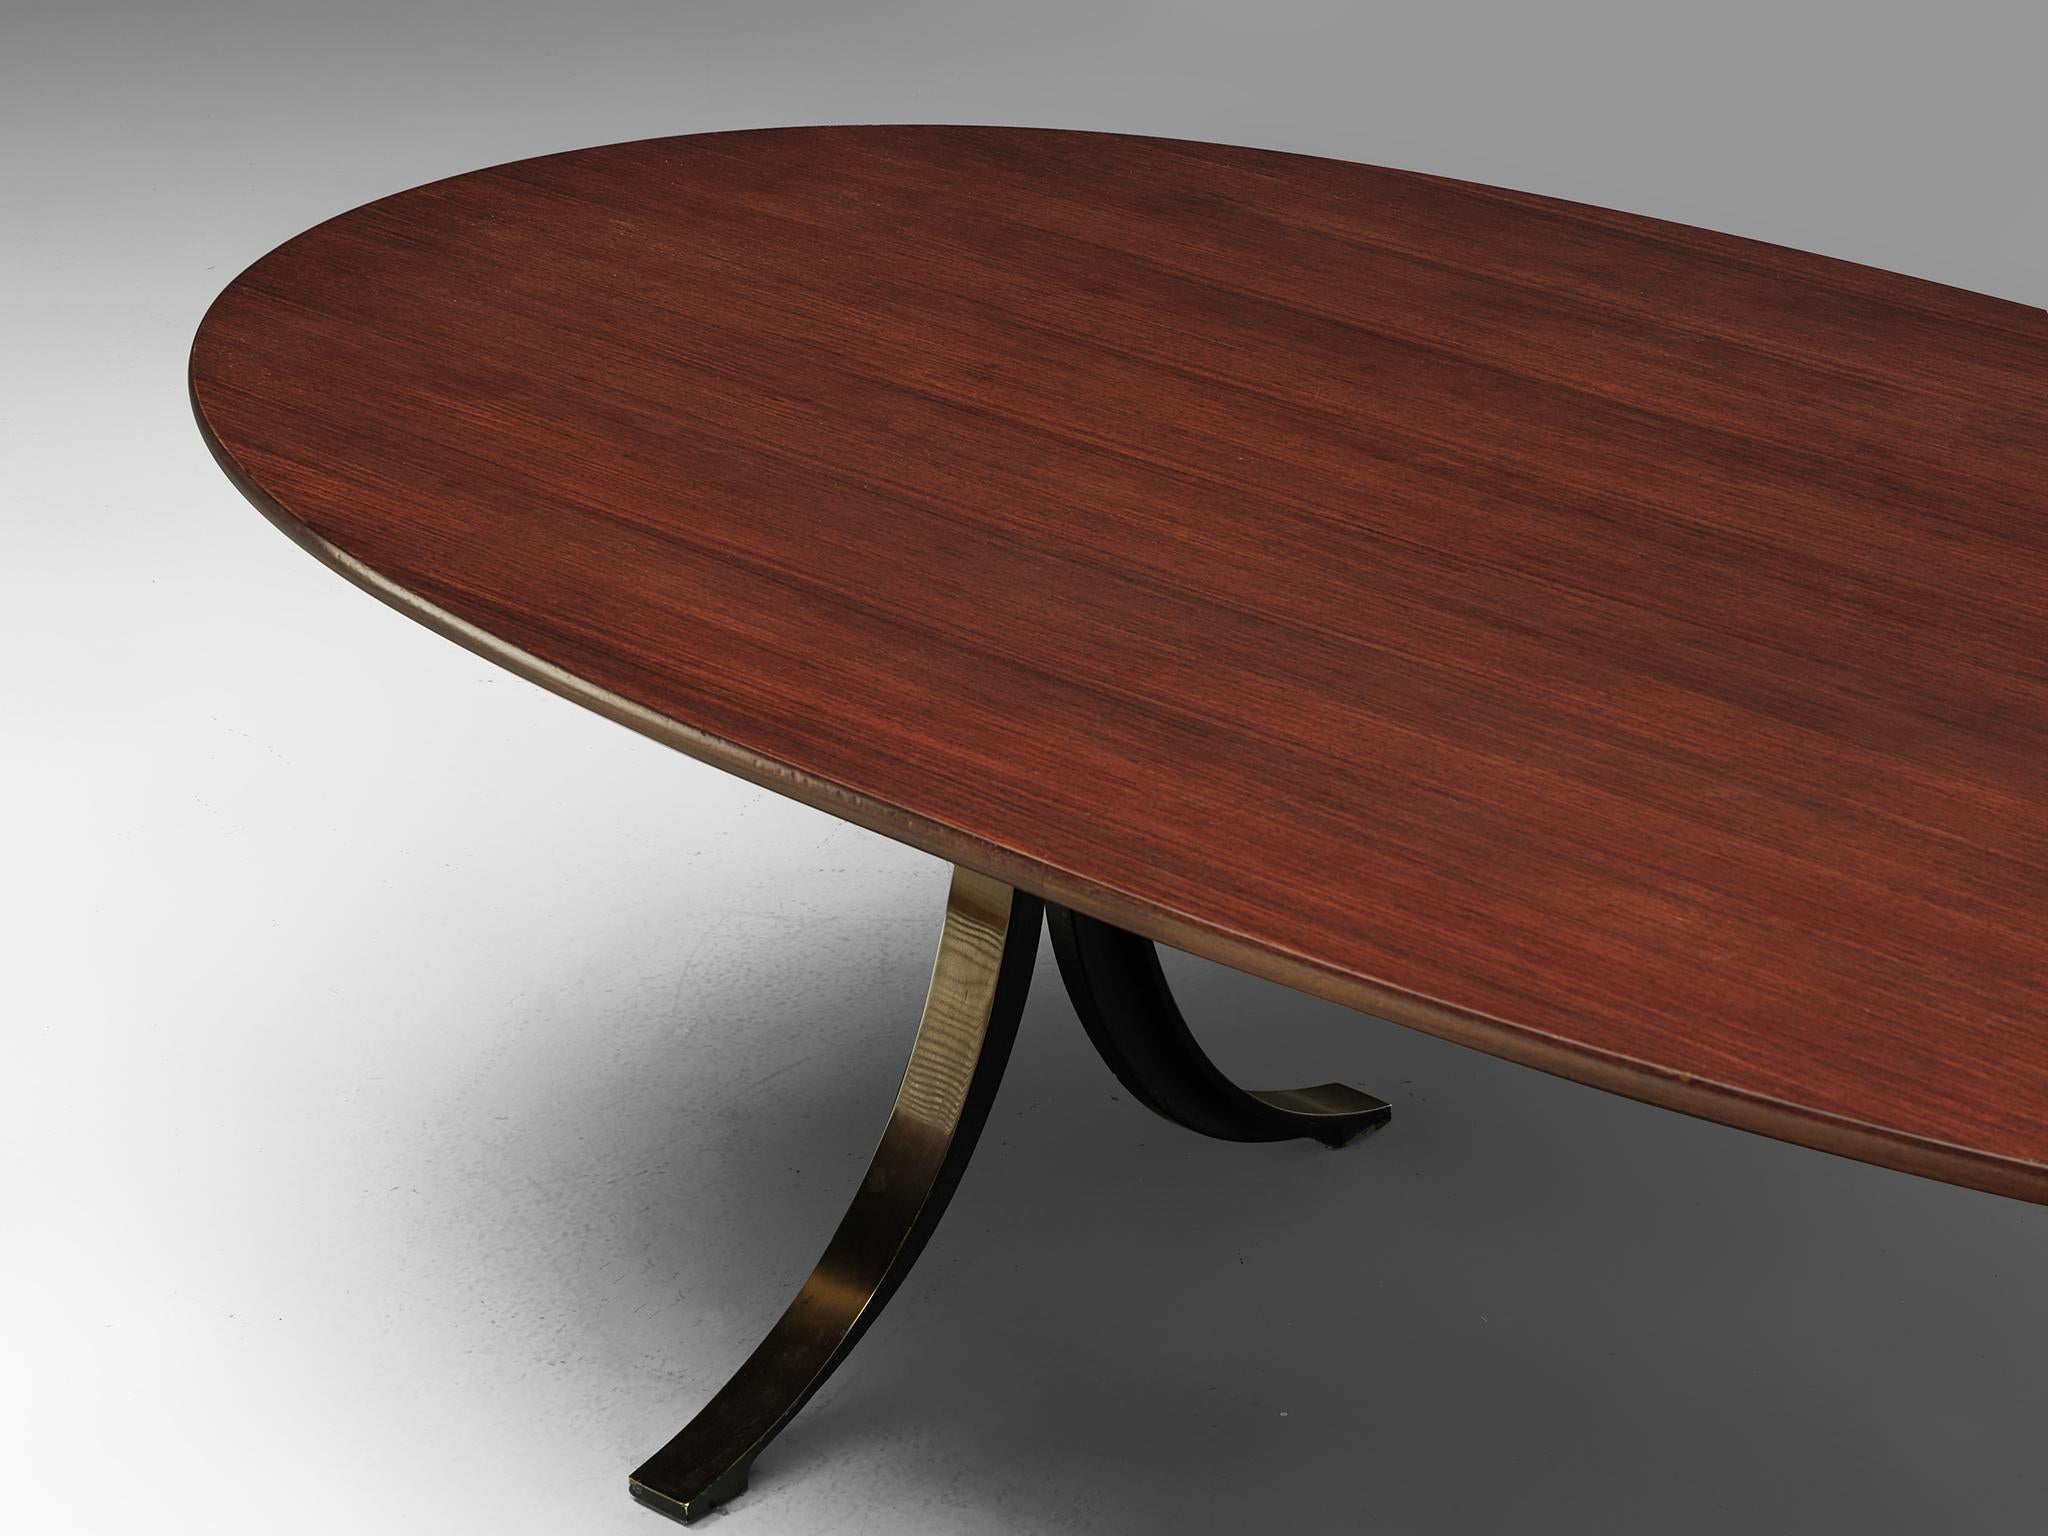 Osvaldo Borsani and Eugenio Gerli for Tecno, T102 dining or conference table, teak and steel, Italy, 1964. 

Oval dining table with teak top and copper colored, metal base. Characteristic on this table is the base, which consist of four C-shaped